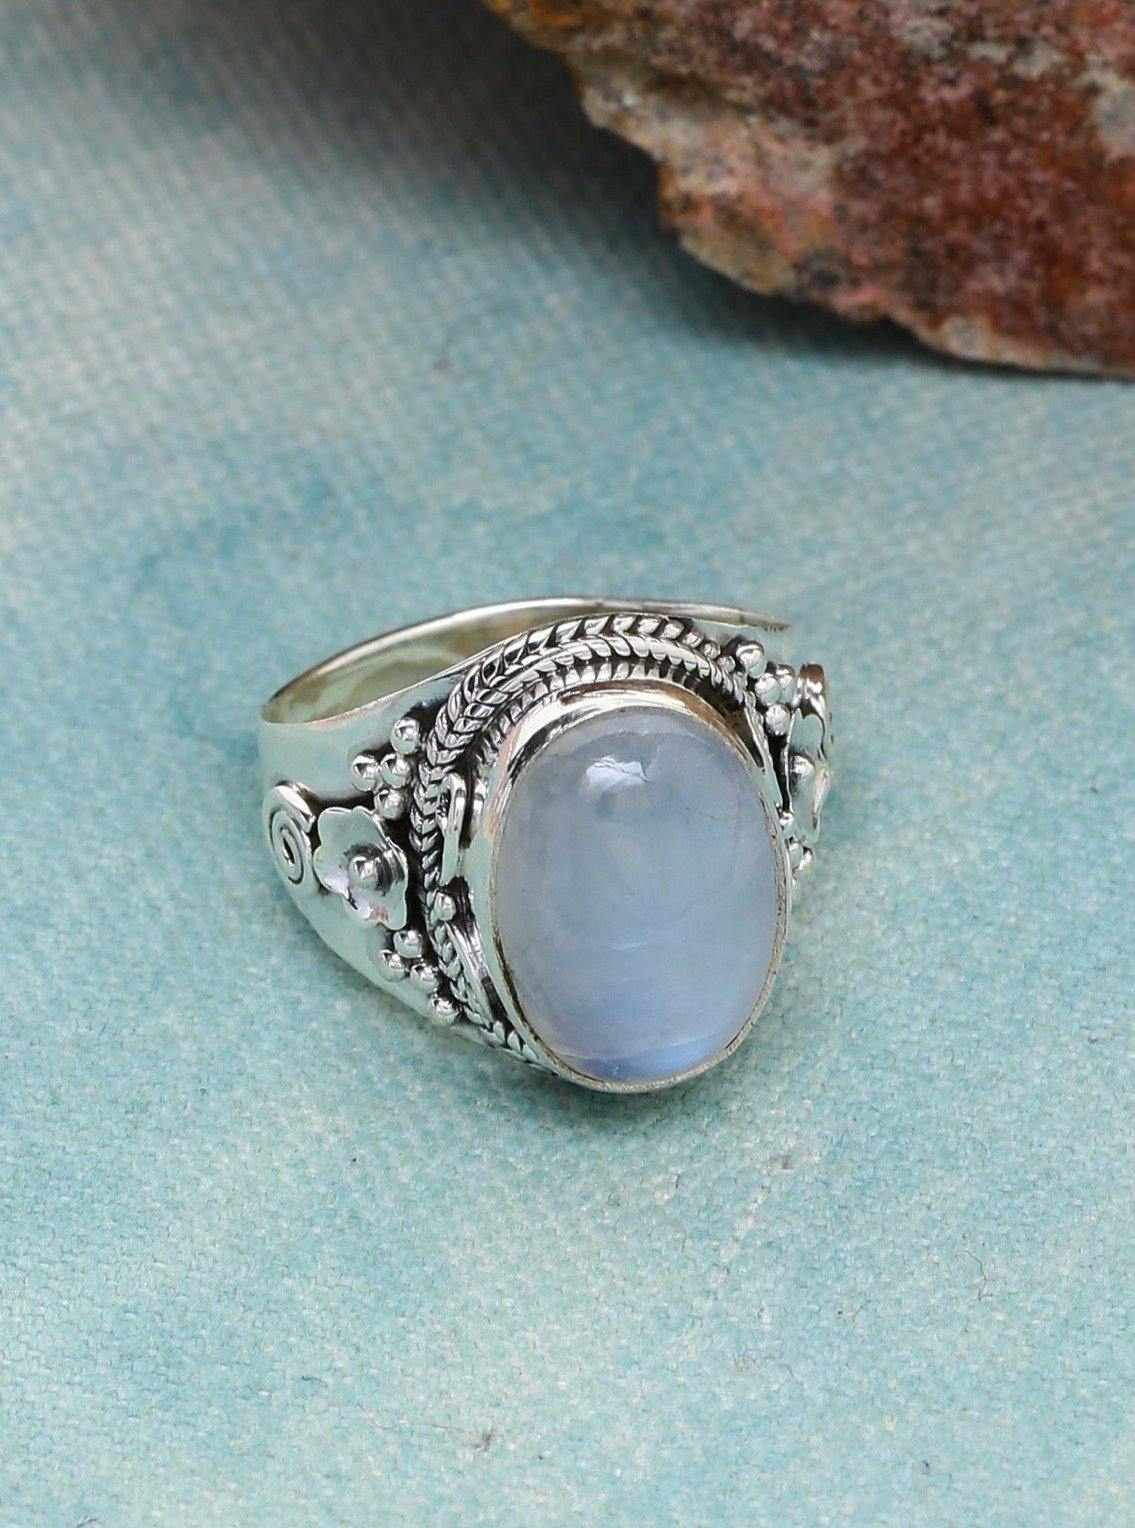 10x14 mm Moonstone Ring 925 Sterling Silver Rope Designed Solitaire Jewelry - YoTreasure